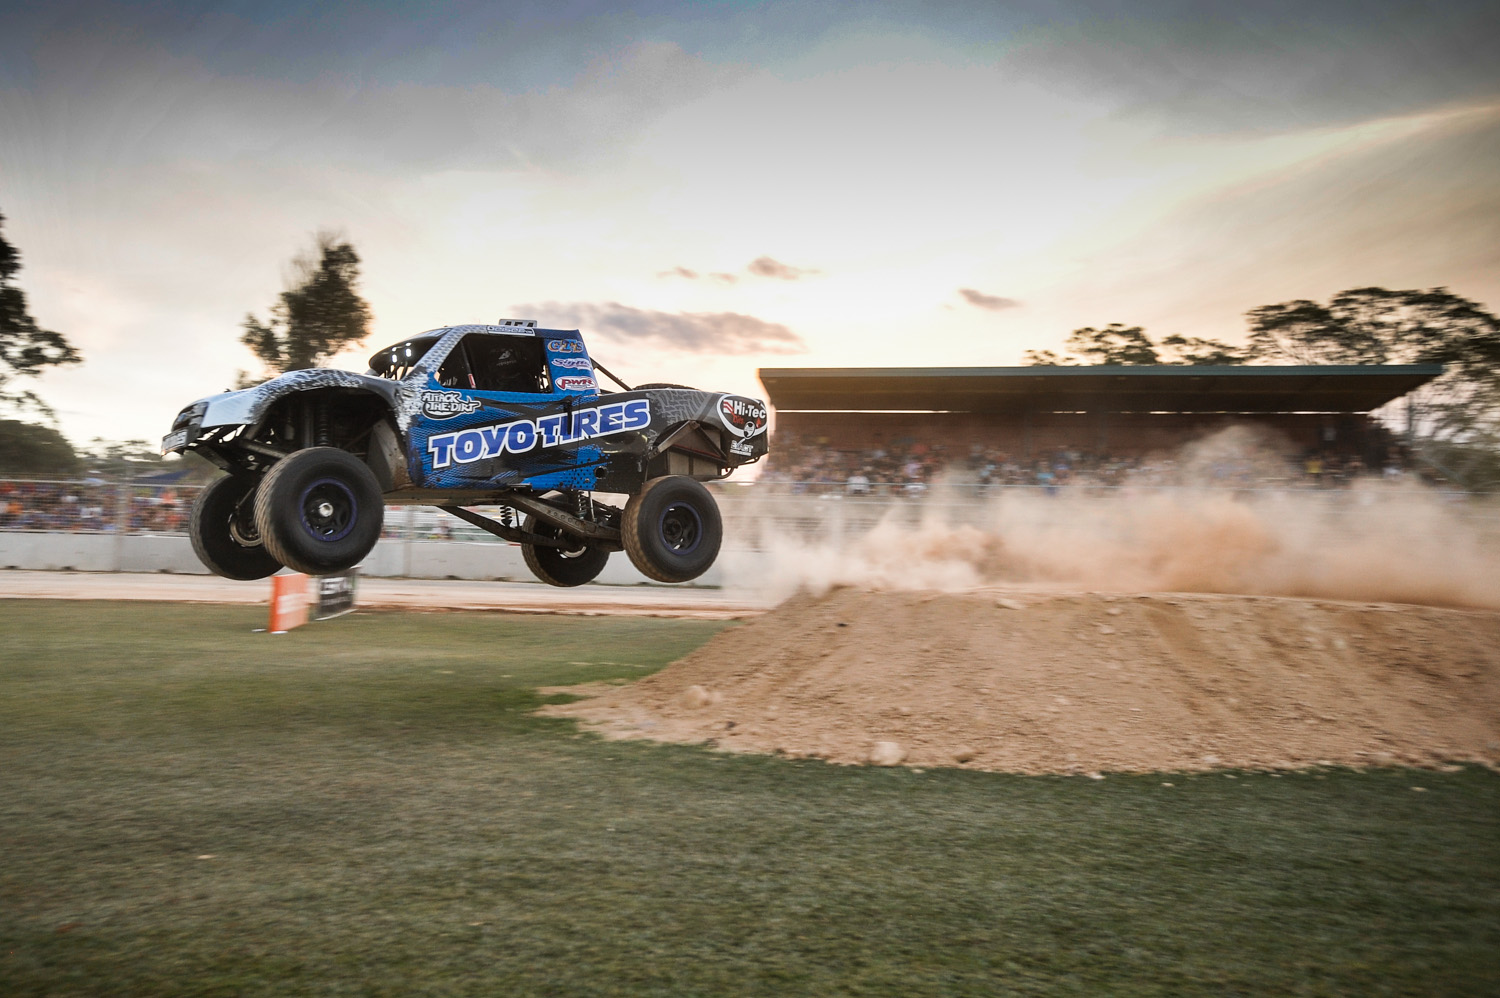 Team Toyo Gear up for 2014 Offroad Season